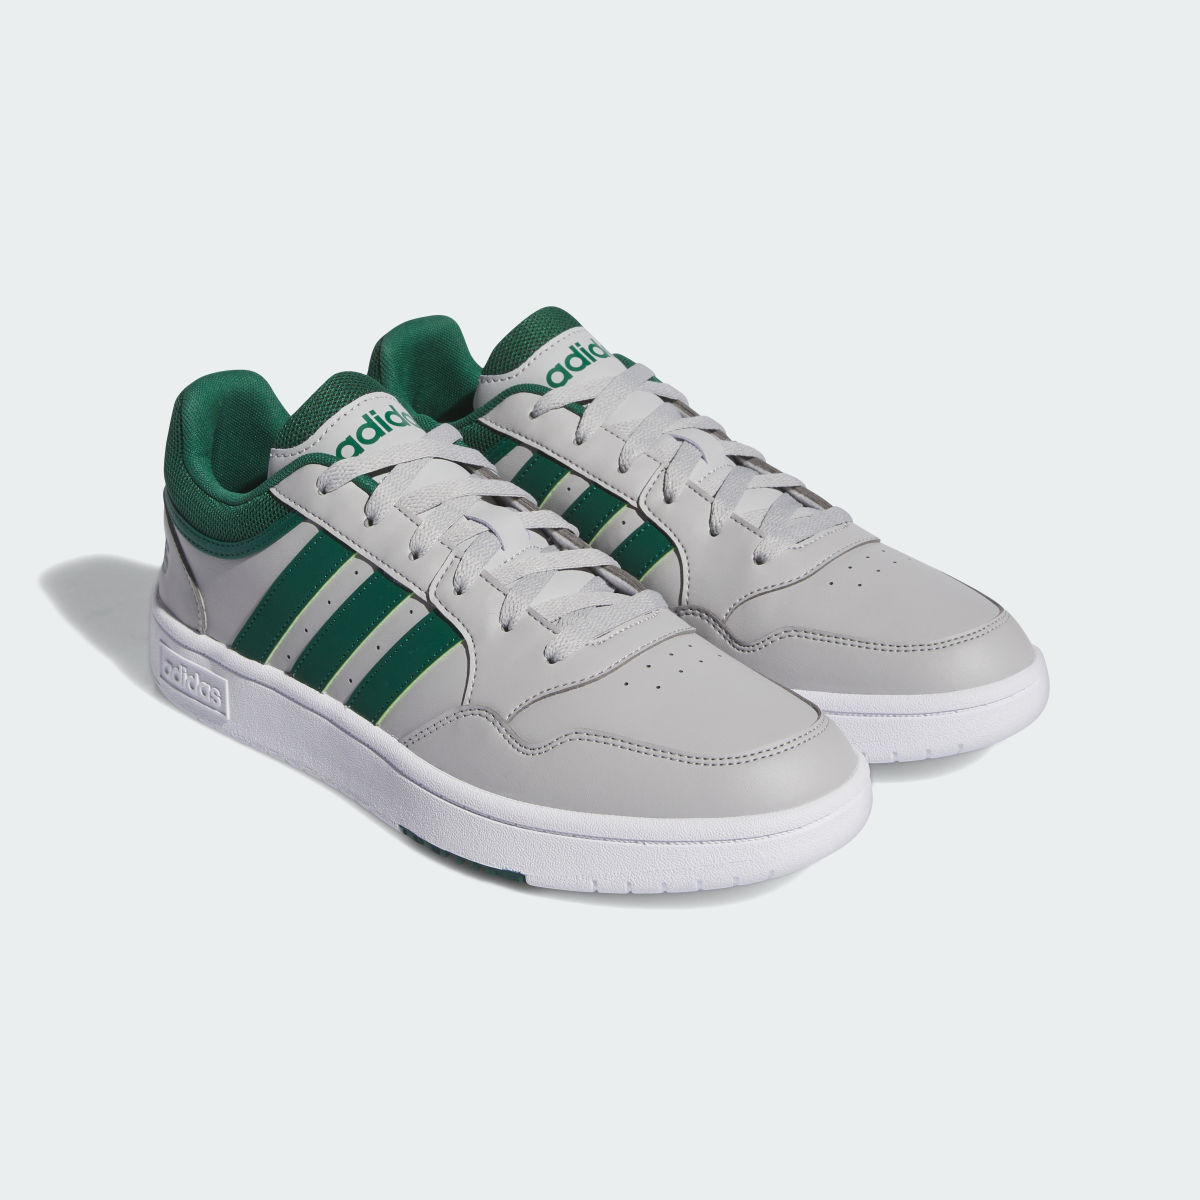 Adidas Hoops 3.0 Low Classic Vintage Shoes. 5